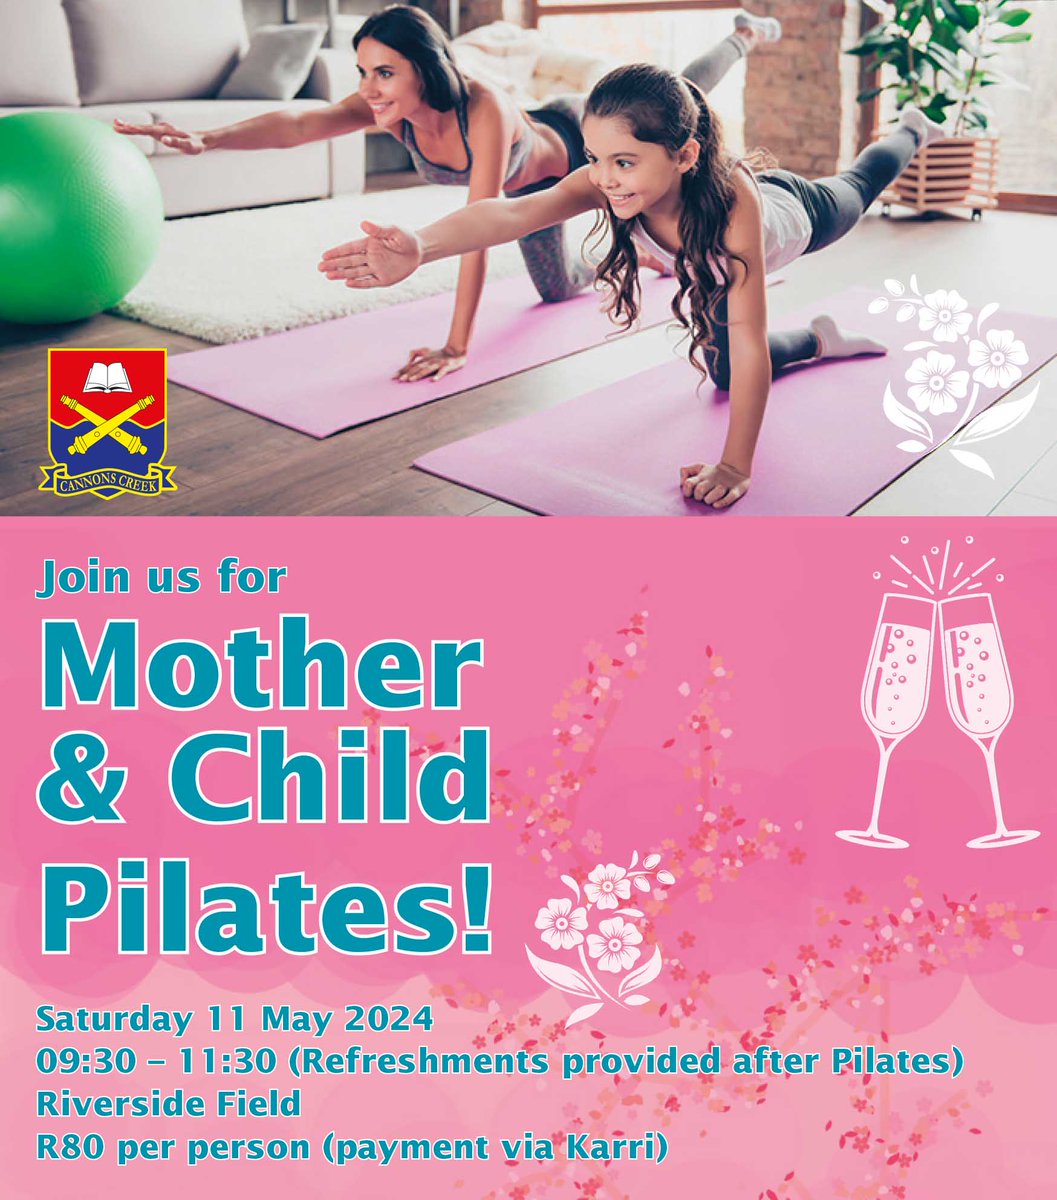 This Mother's Day, let's make Mom feel like the superhero she truly is! Bring your mats and sweat bands - it's gonna be a workout! Prizes for the best dressed. Join us in celebrating our moms/guardians at Cannons Creek on the 11th of May for a fun-filled morning. #mothersday